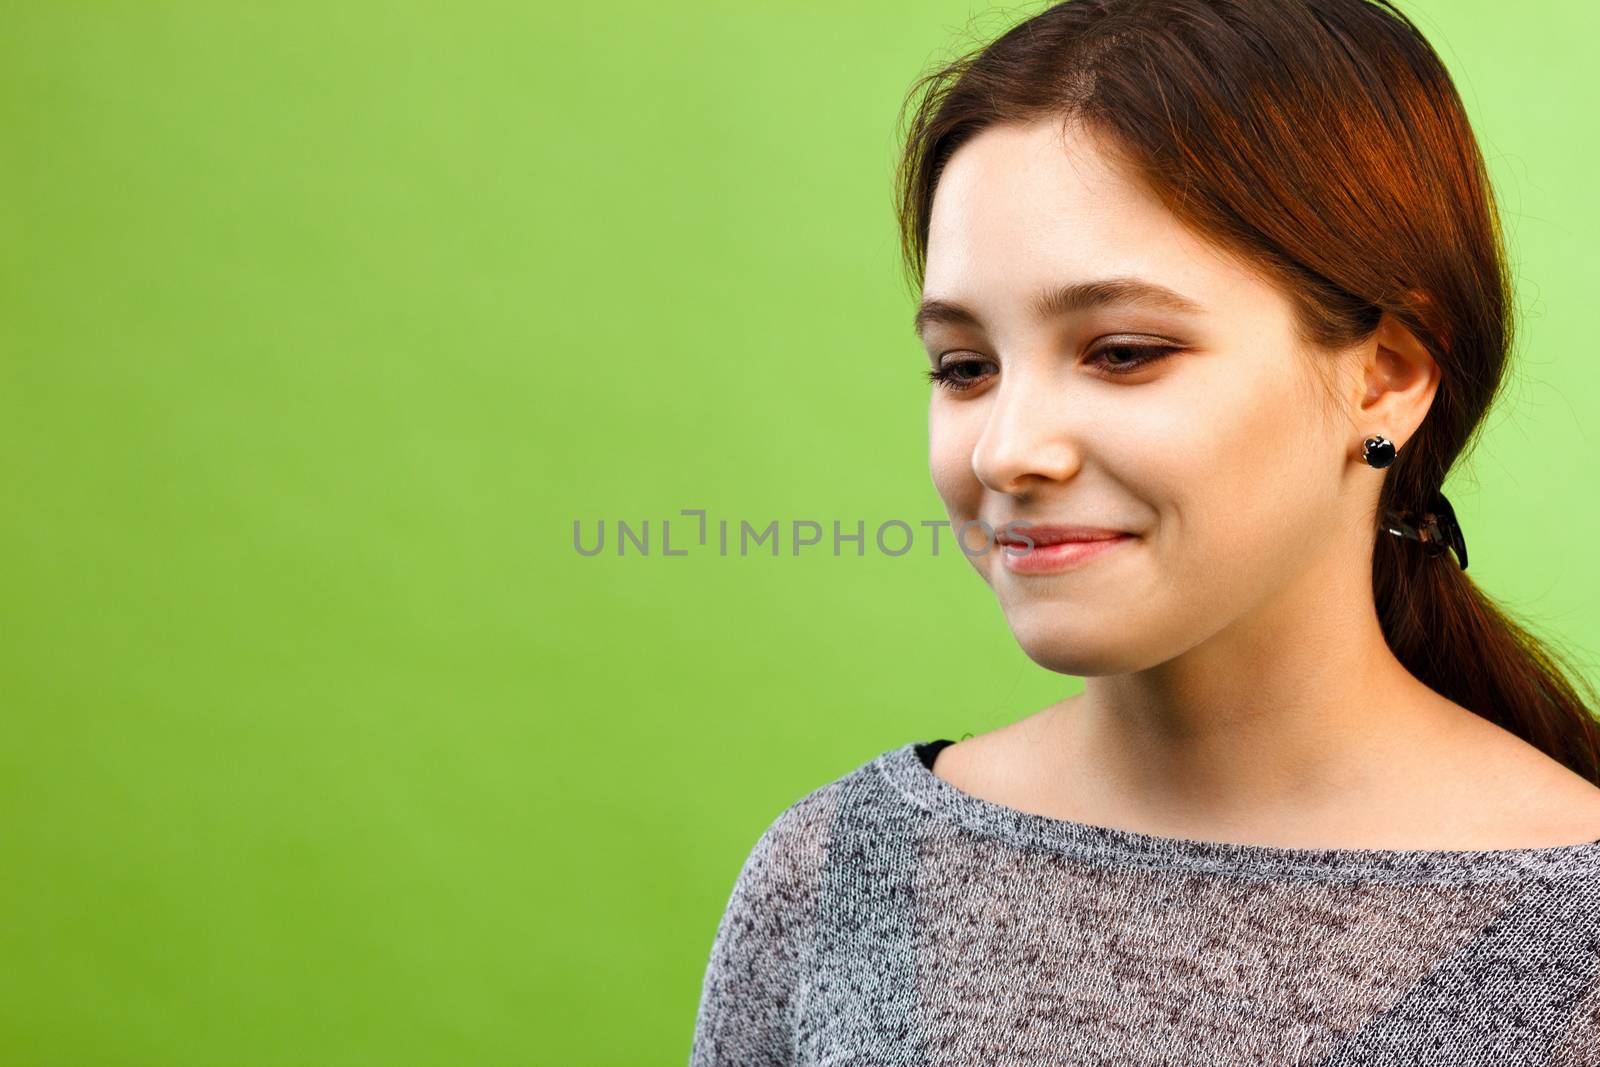 Portrait of cute smiling girl looking down on green background